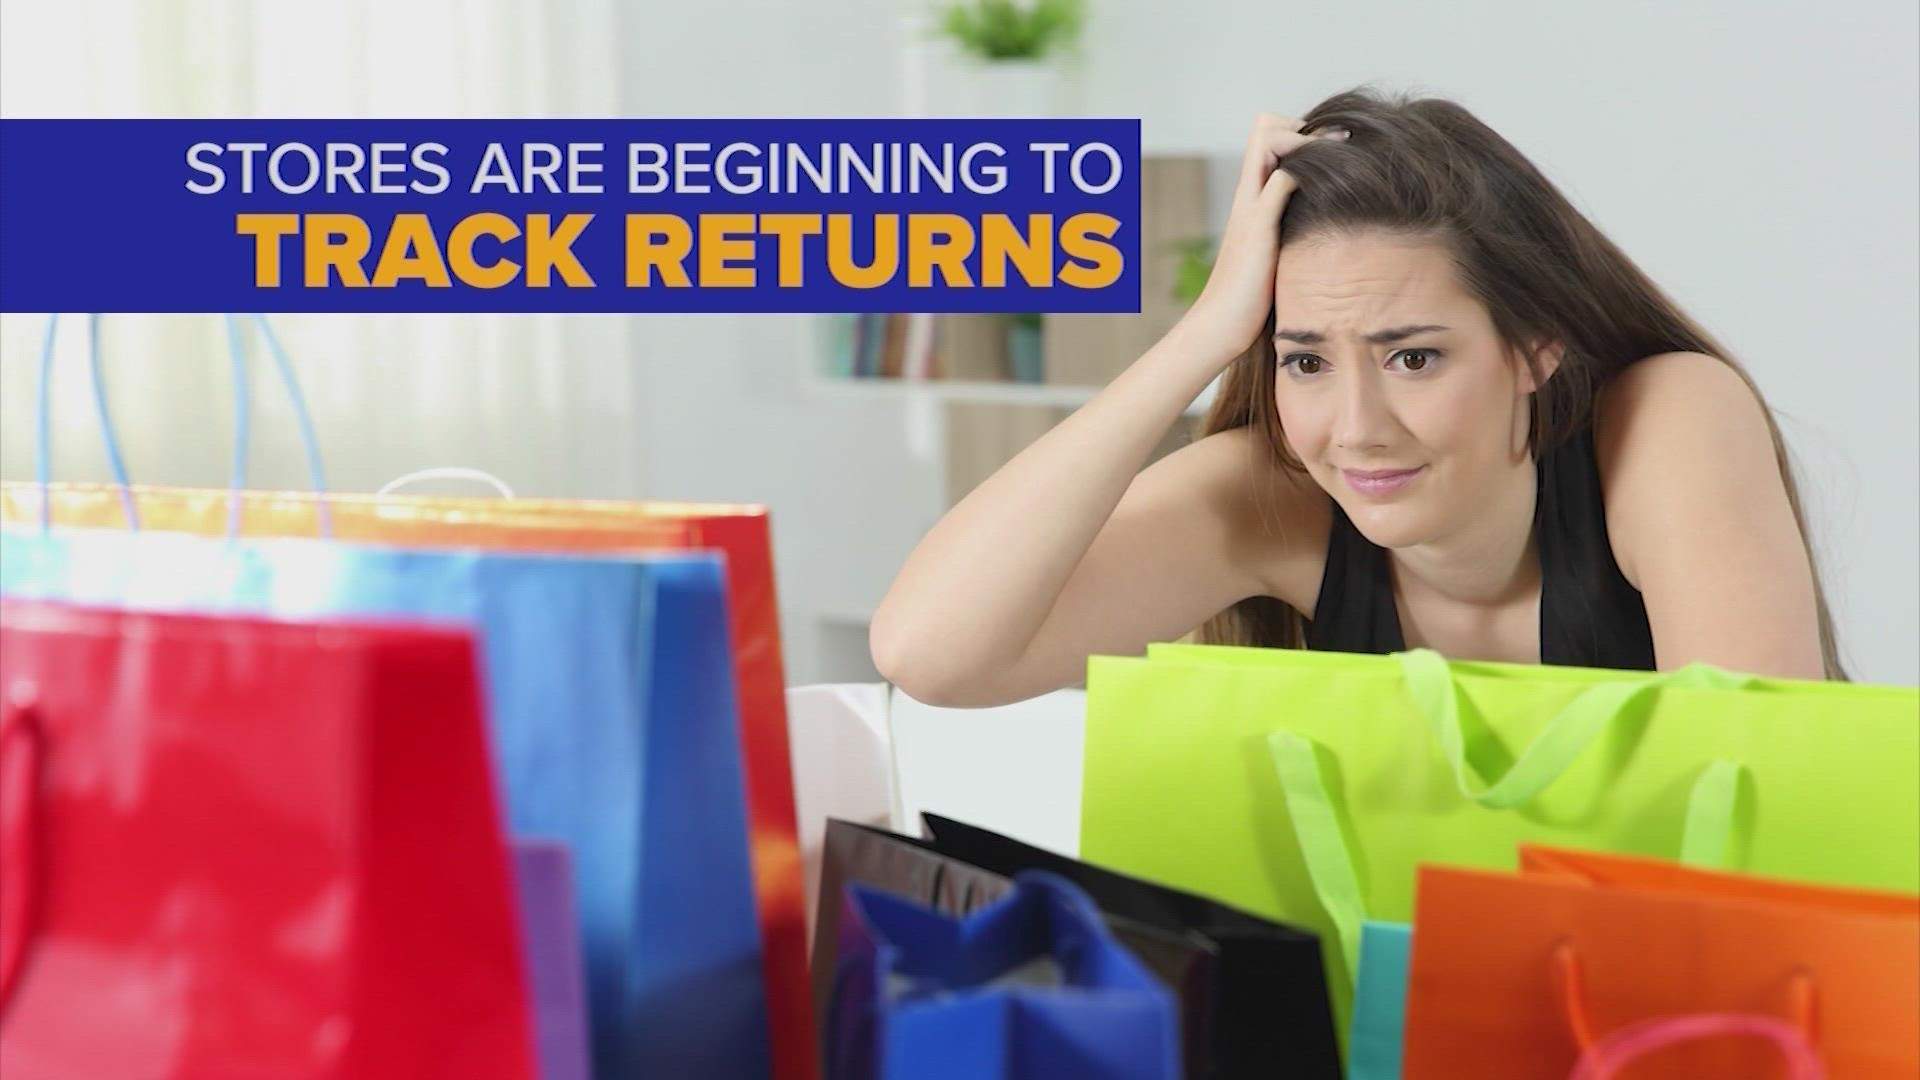 It turns out a lot of big stores are tracking returns, and if you return one to many item, you could get banned.